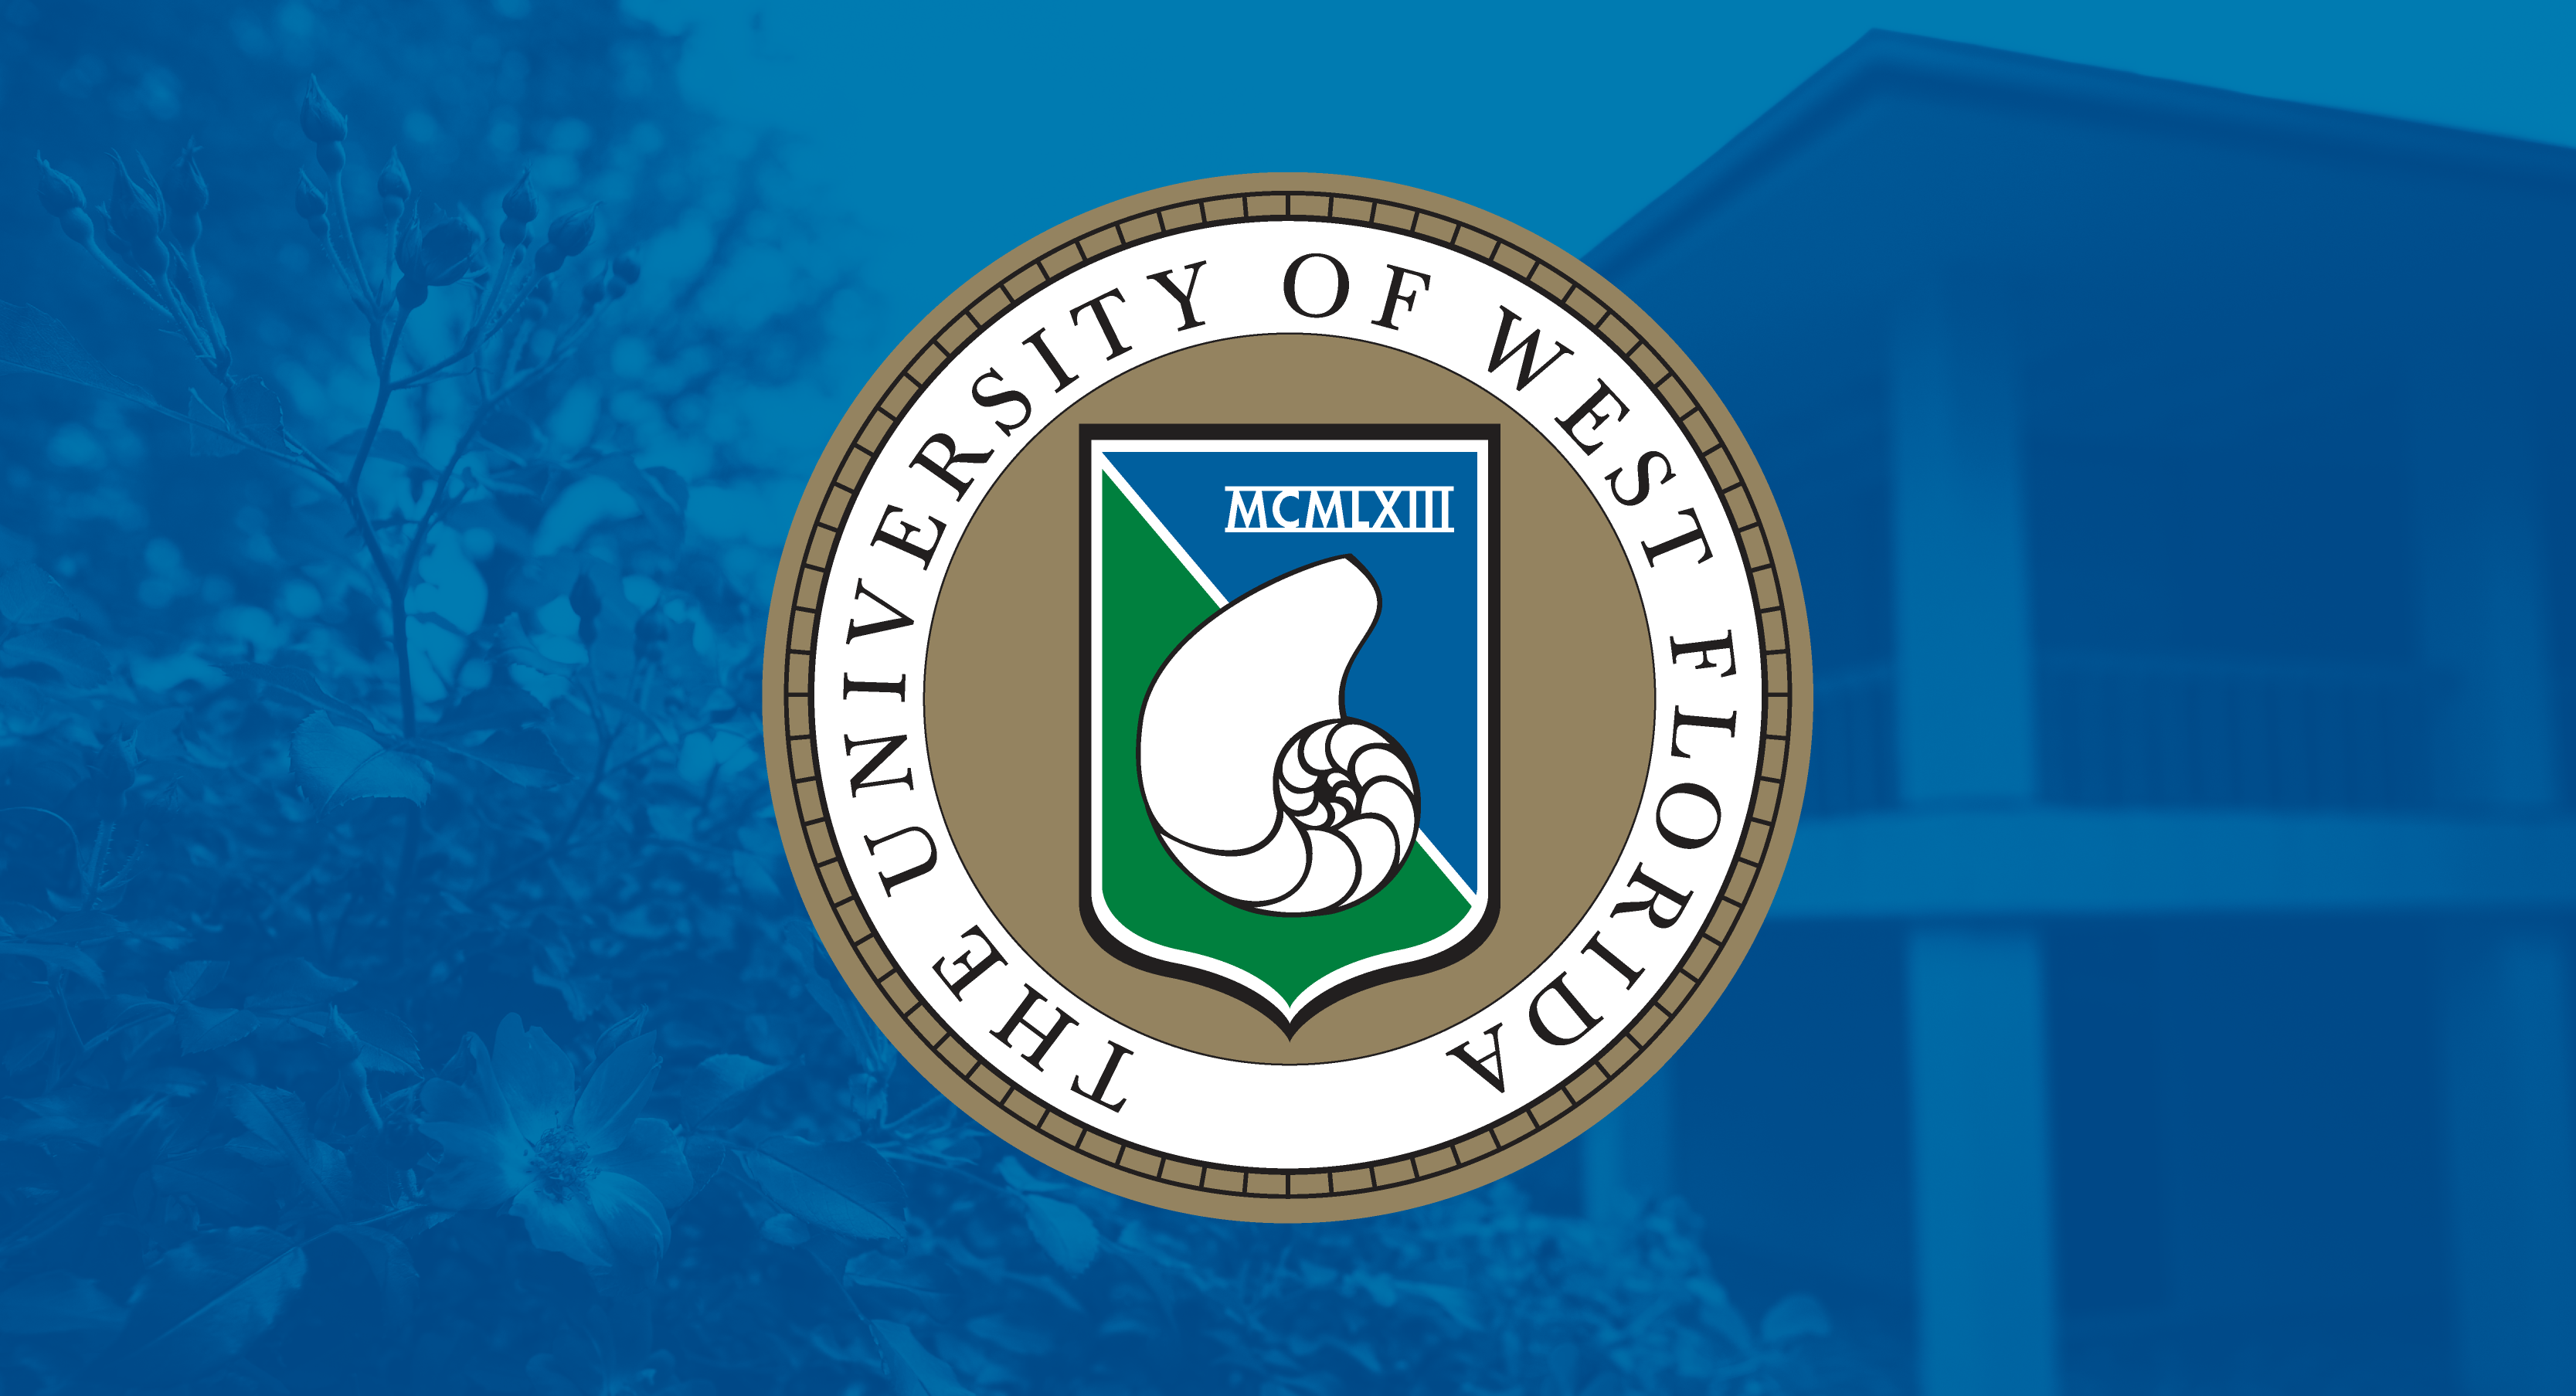 Presidential seal over a picture of the UWF Pensacola Campus